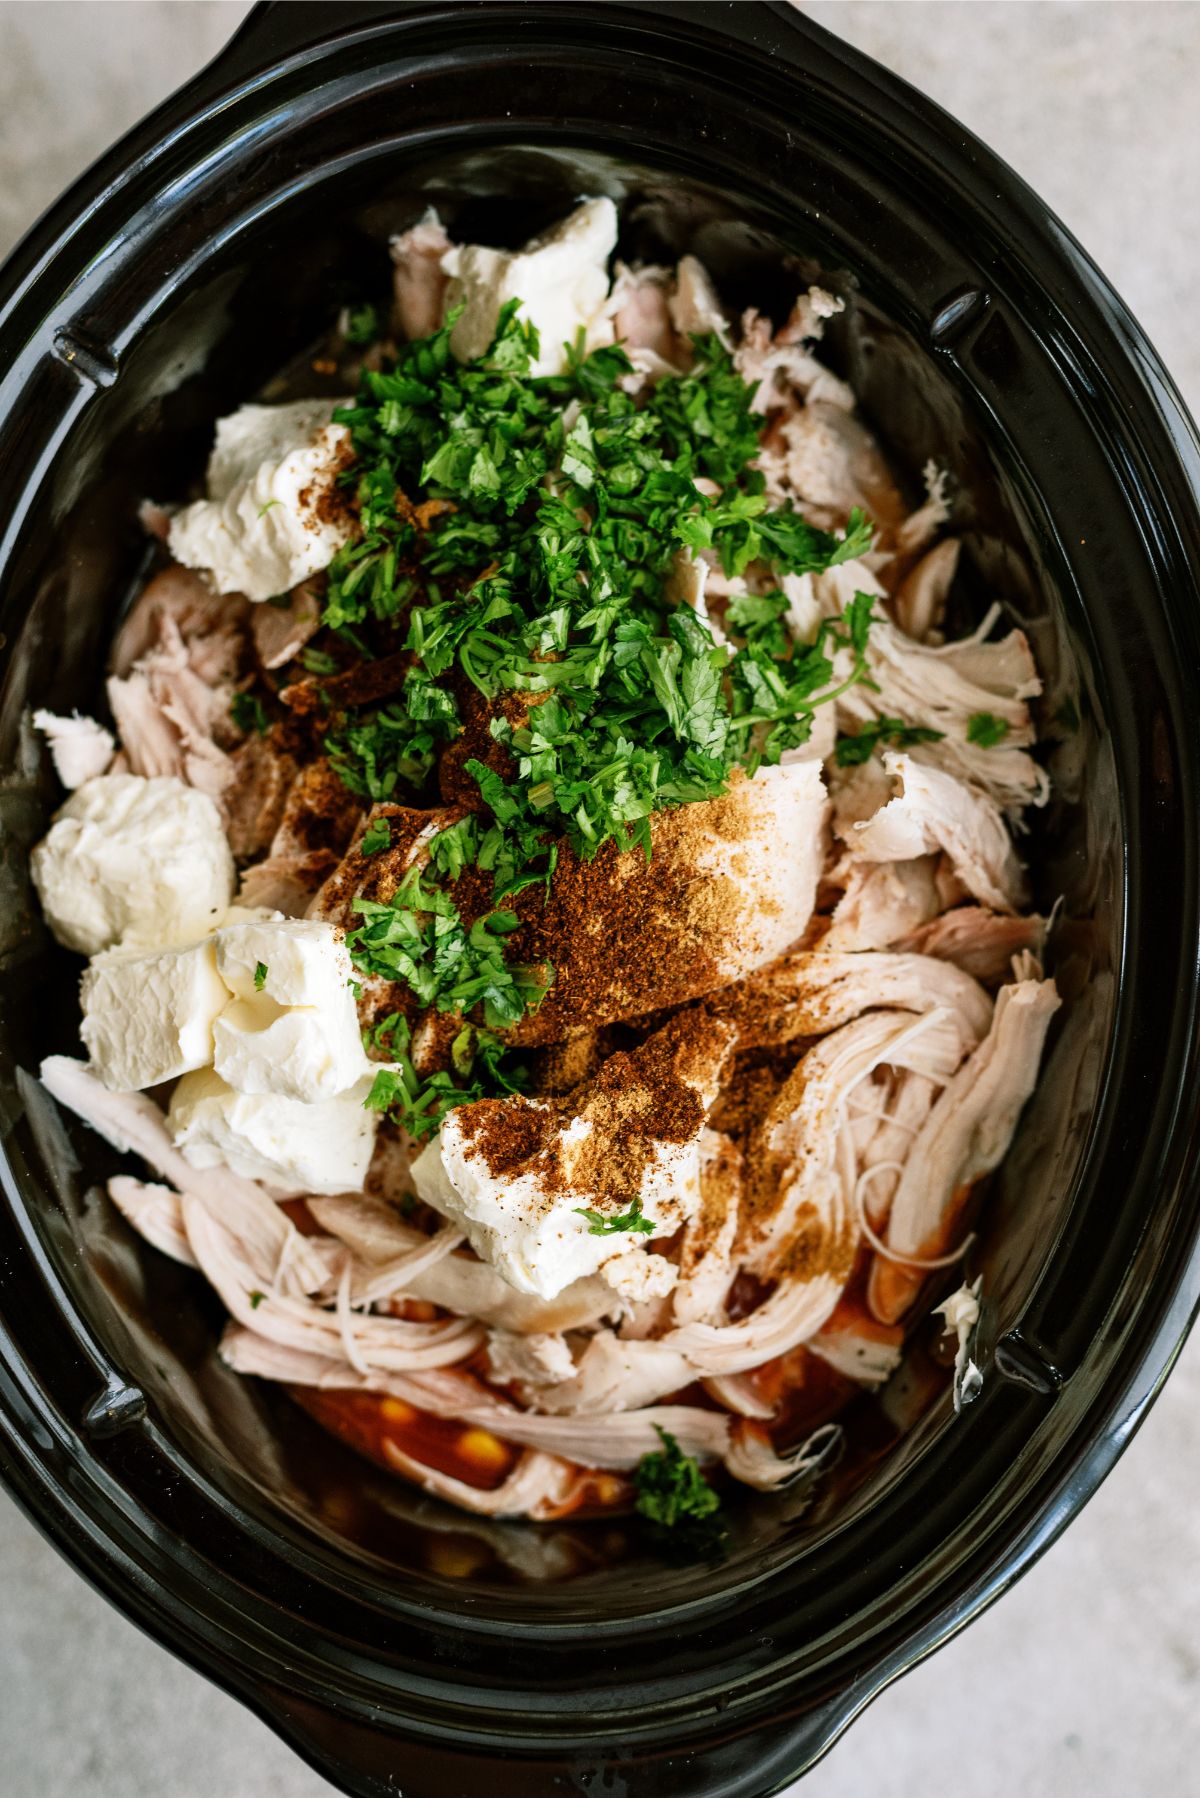 All ingredients for Slow Cooker Chicken Enchilada Pasta except Orzo pasta in the slow cooker